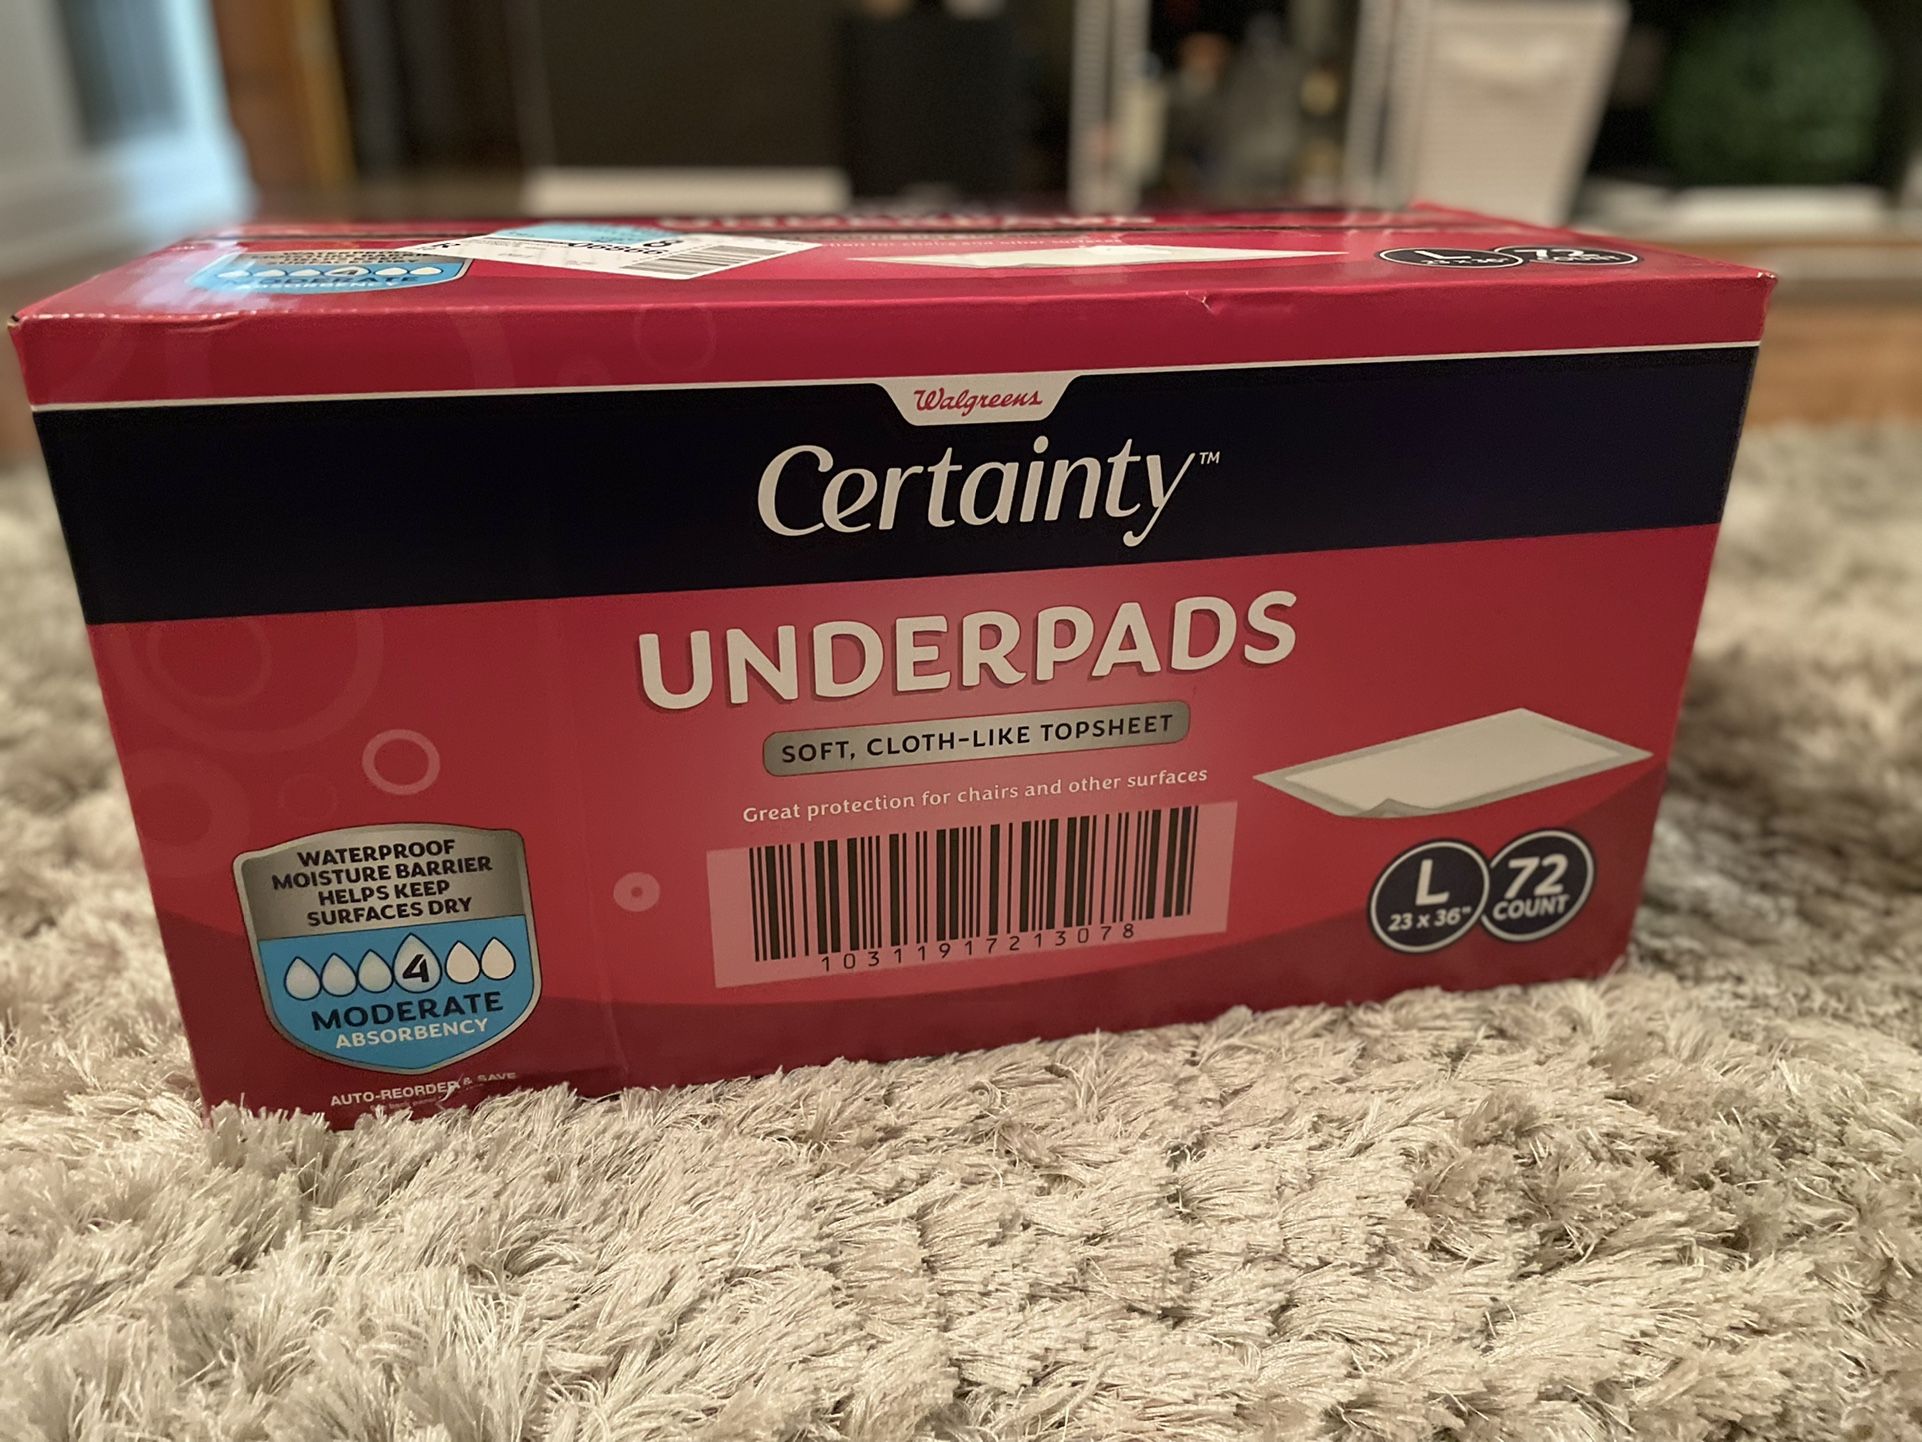 Certainty Underpads (Walgreens) L 72 Count